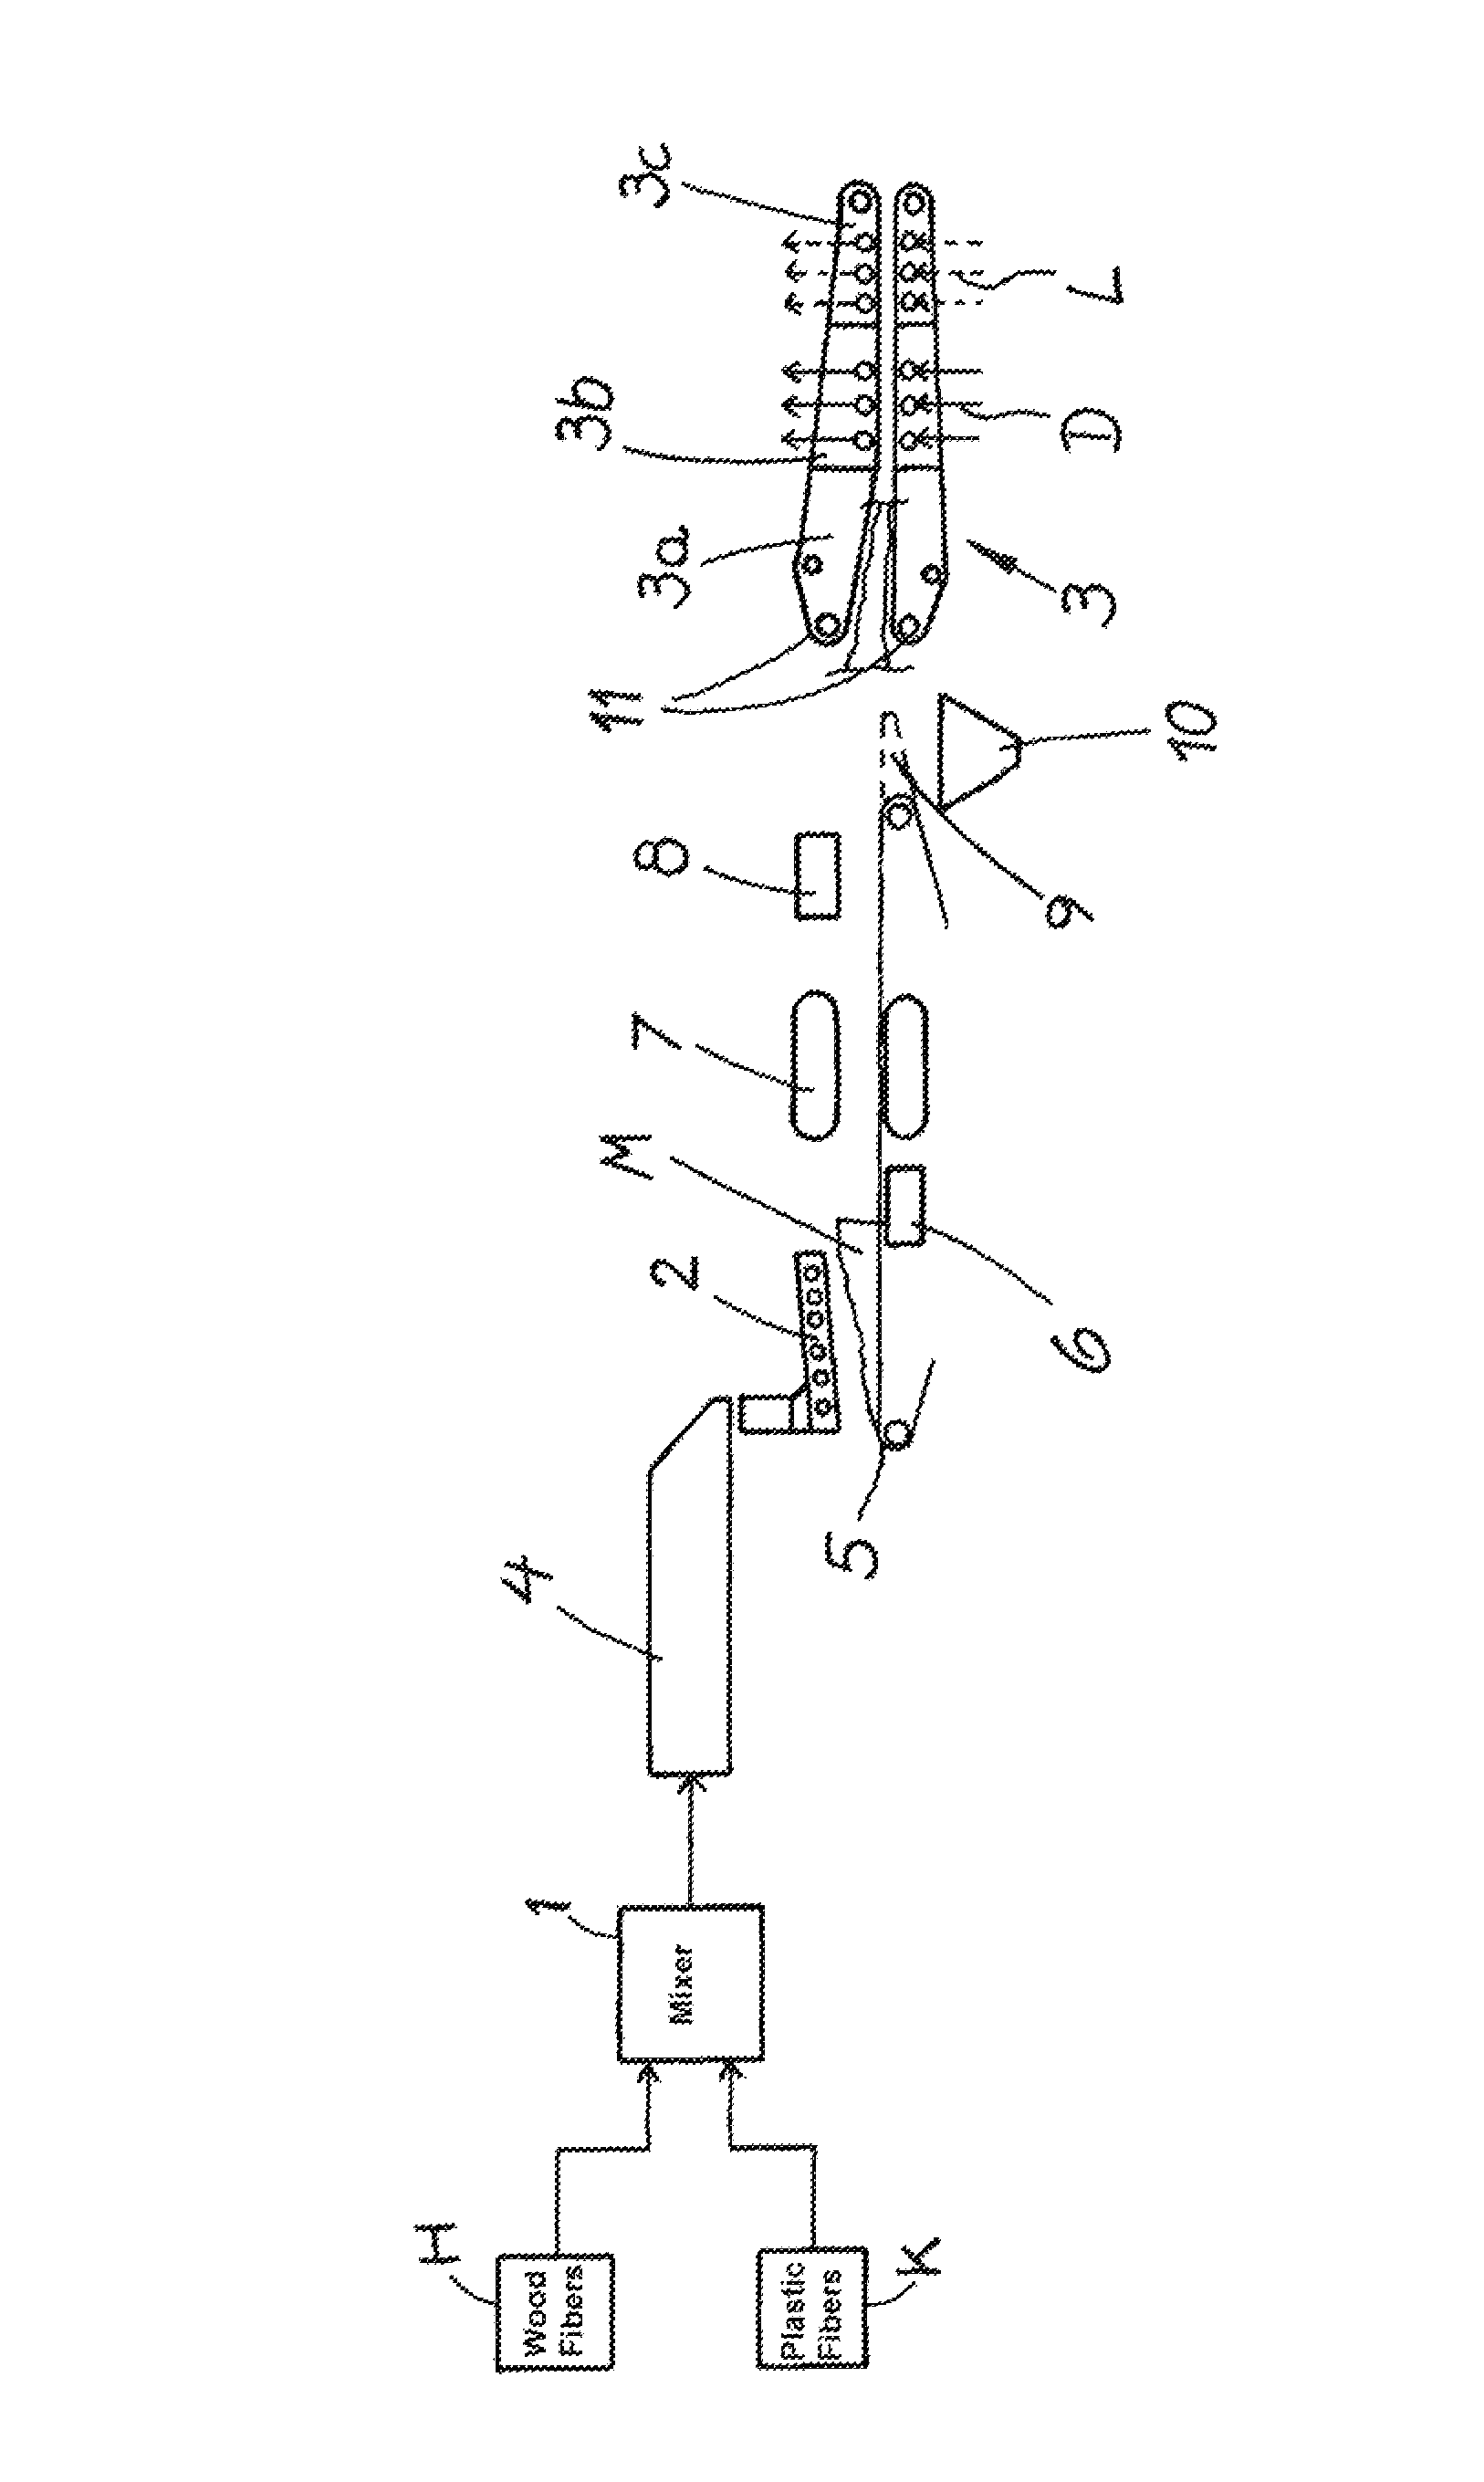 Method for manufacturing wood fiber insulating boards